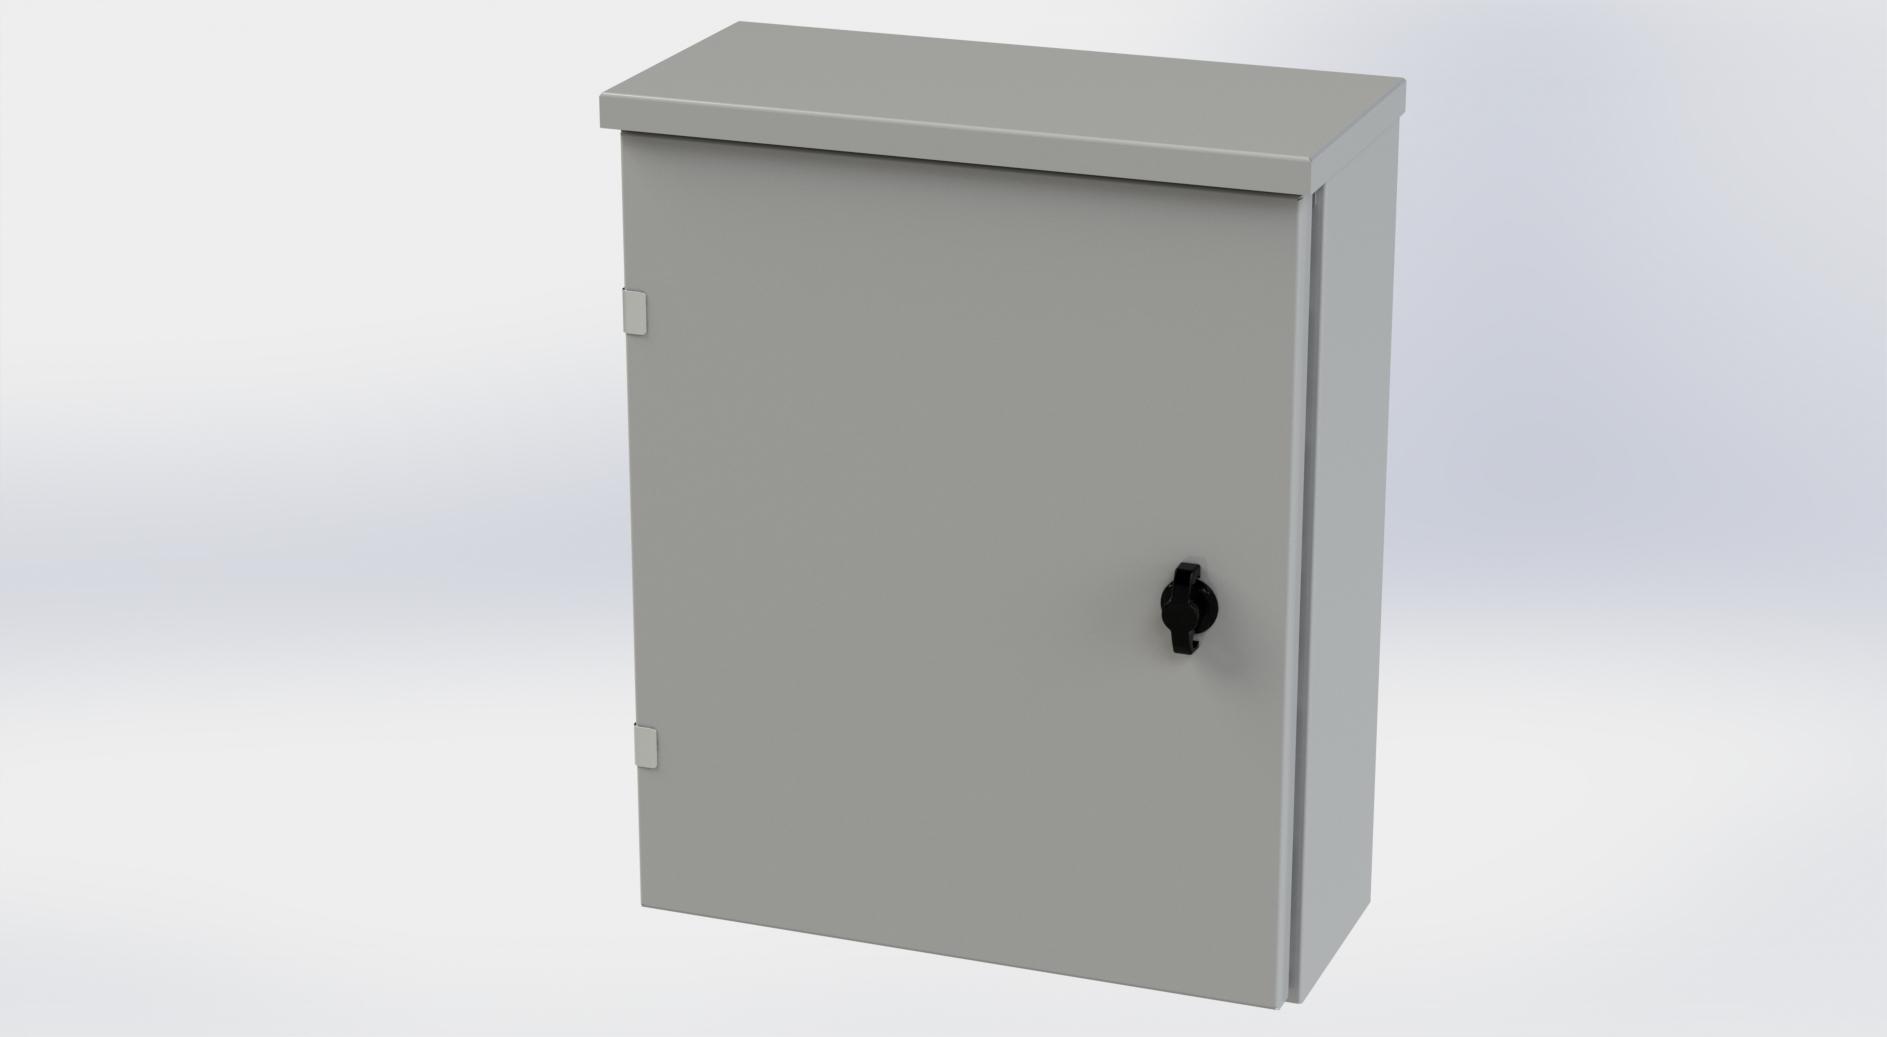 Saginaw Control SCE-20R1606LP Type-3R Hinged Cover Enclosure, Height:20.00", Width:16.00", Depth:6.00", ANSI-61 gray powder coating inside and out. Optional sub-panels are powder coated white.